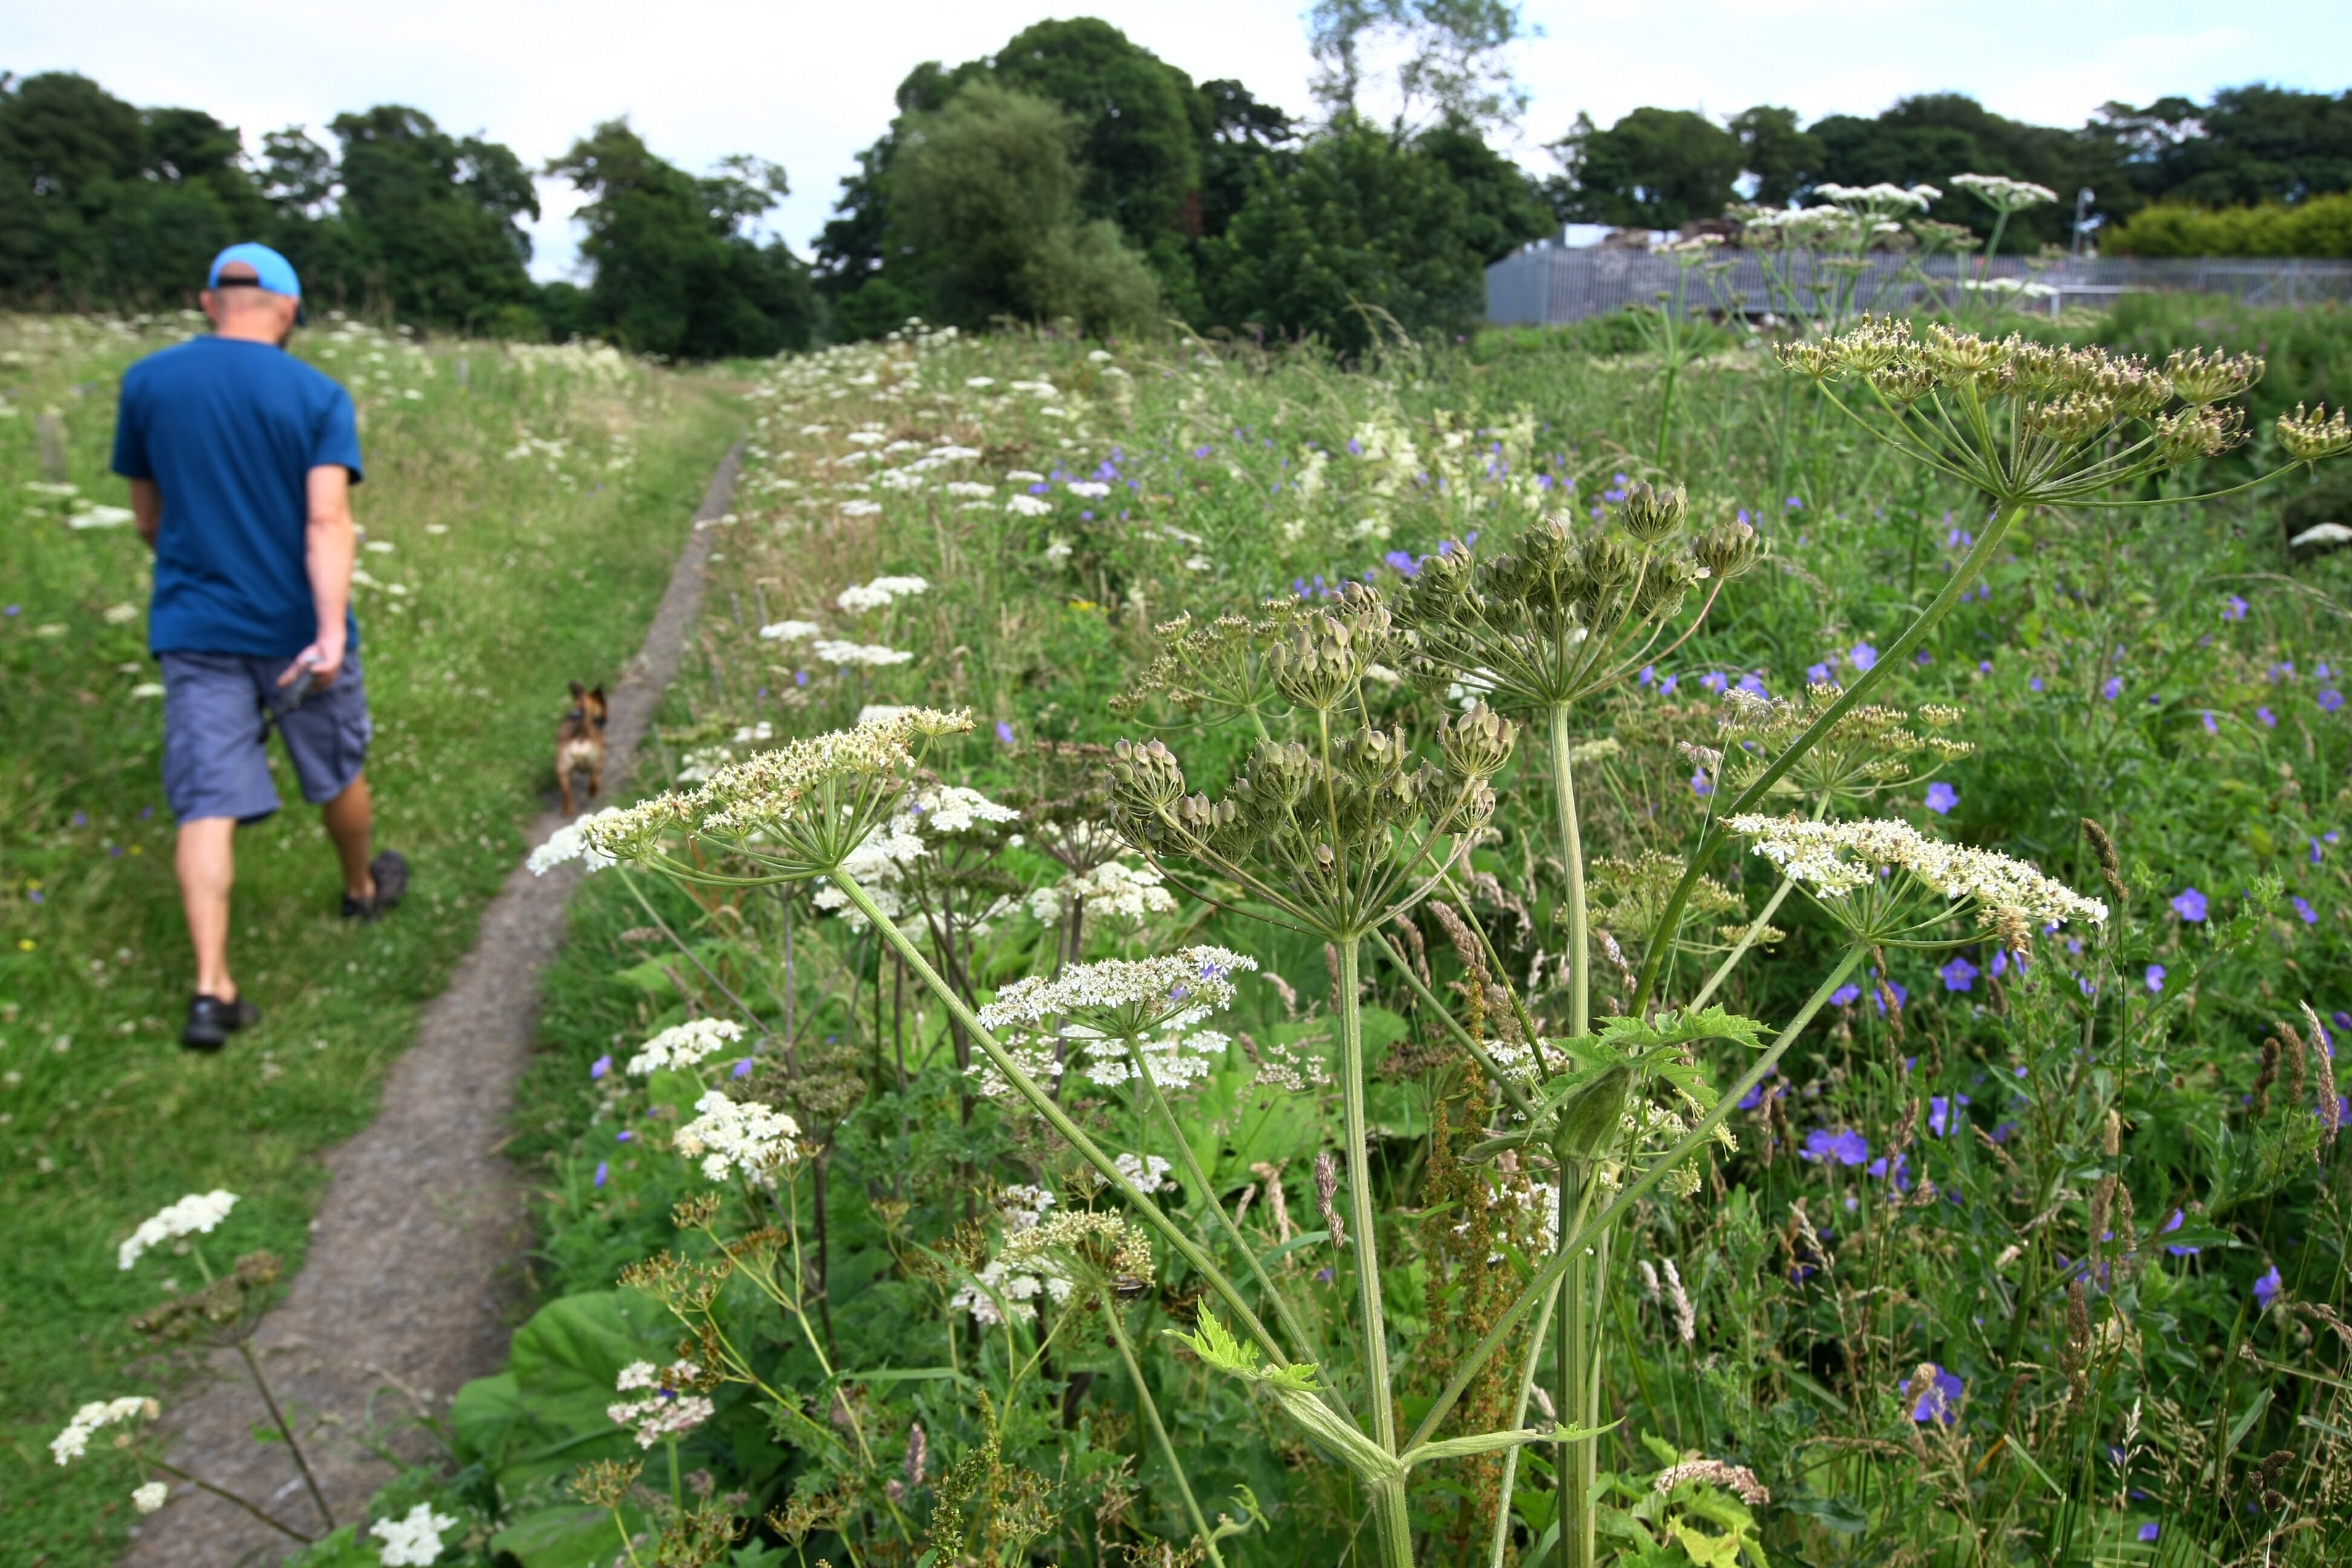 Giant Hogweed is killed off with weedkiller, including Roundup, or glyphosate.